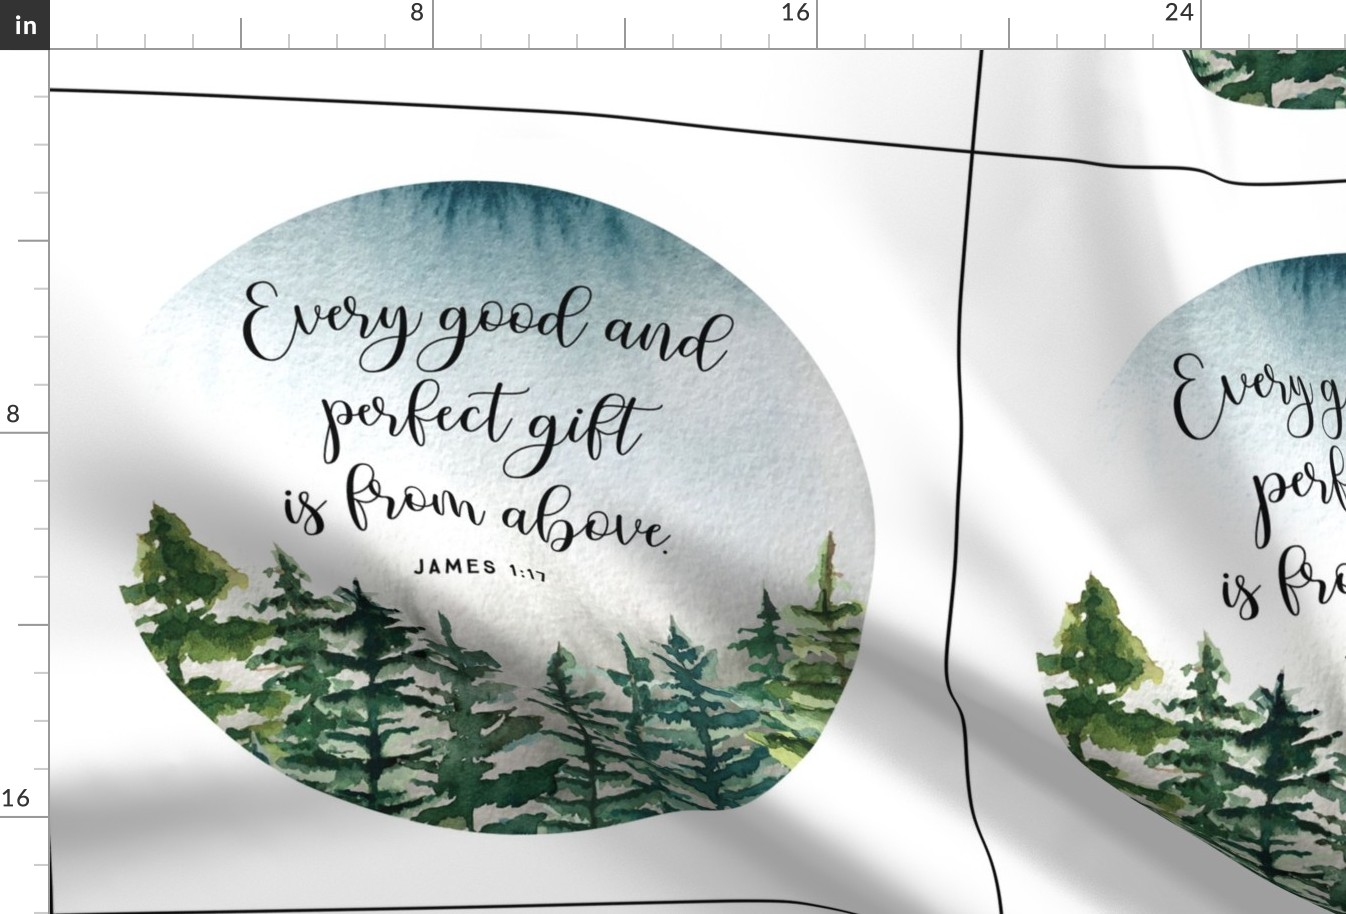 6 loveys: round // every good and perfect gift is from above // john 1:17 